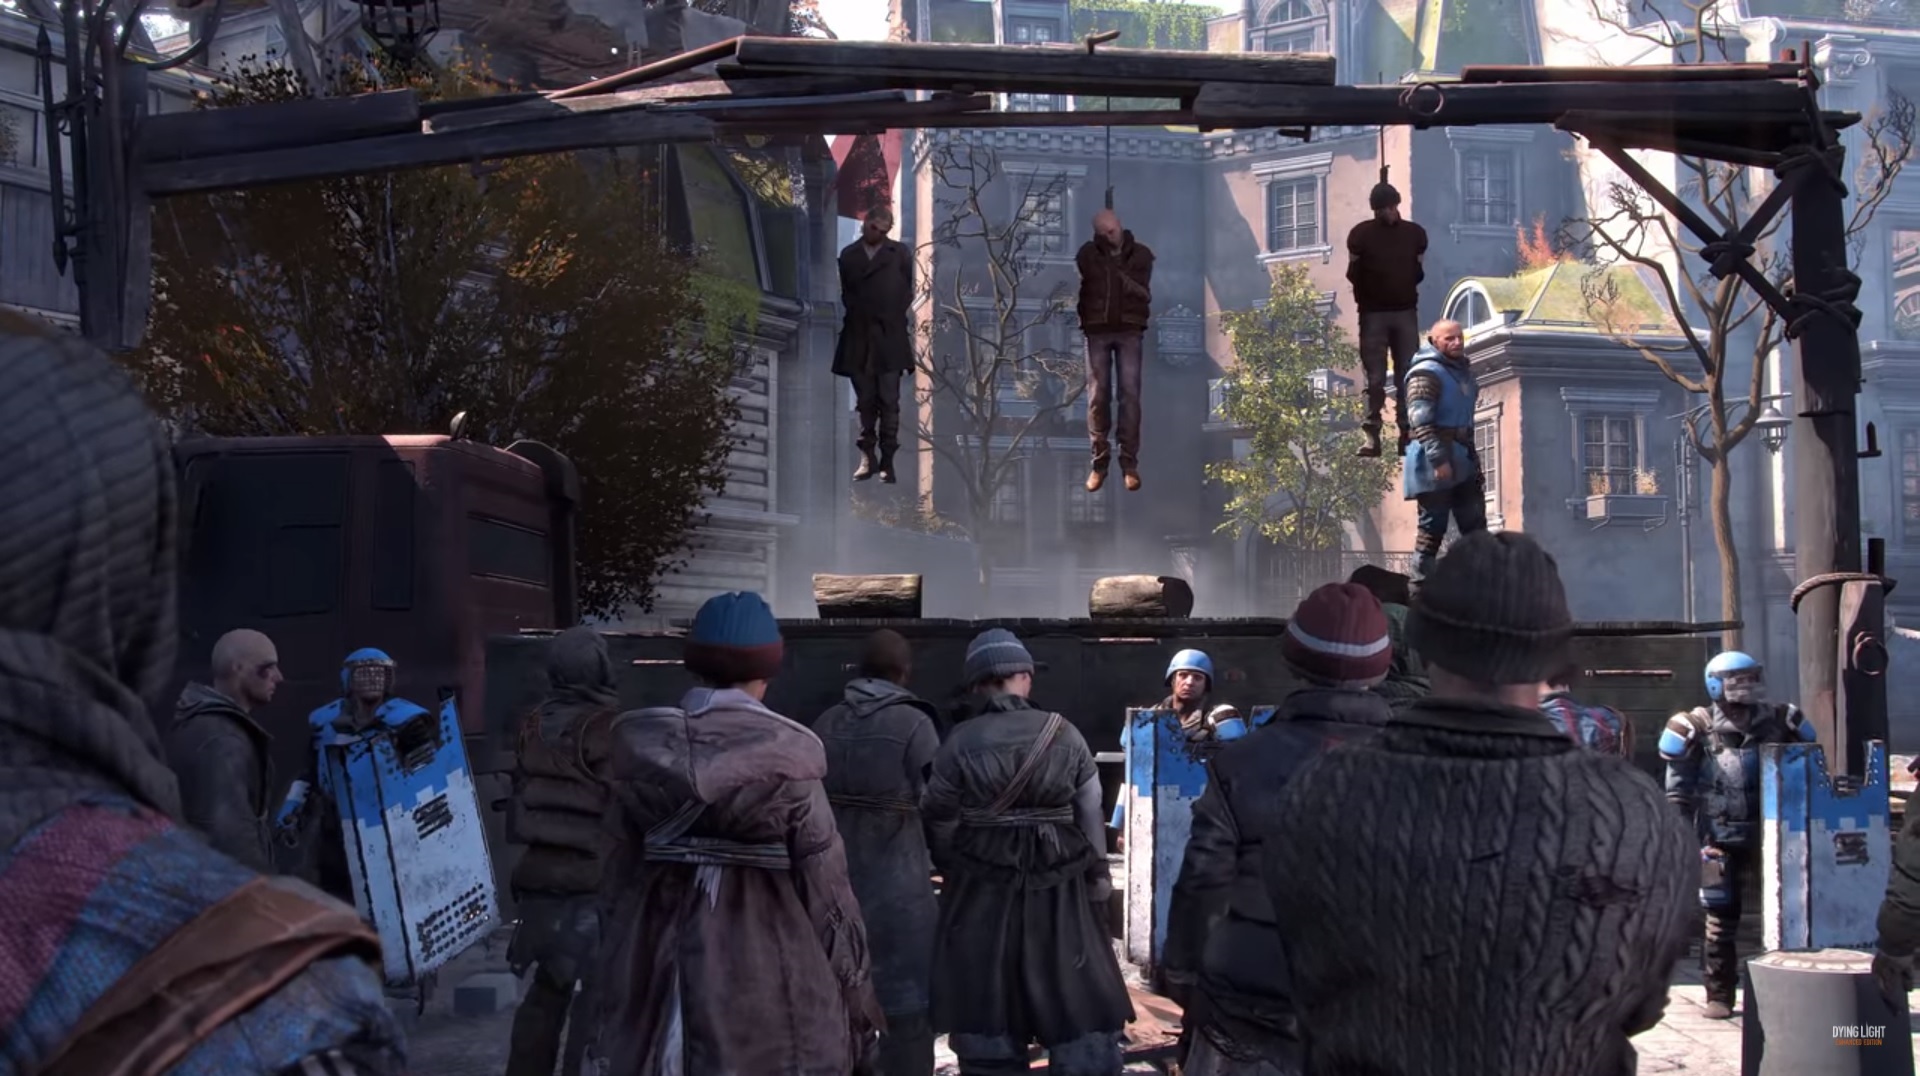 Dying Light 2 - Characters looking up at a gallows where three people and hanging.